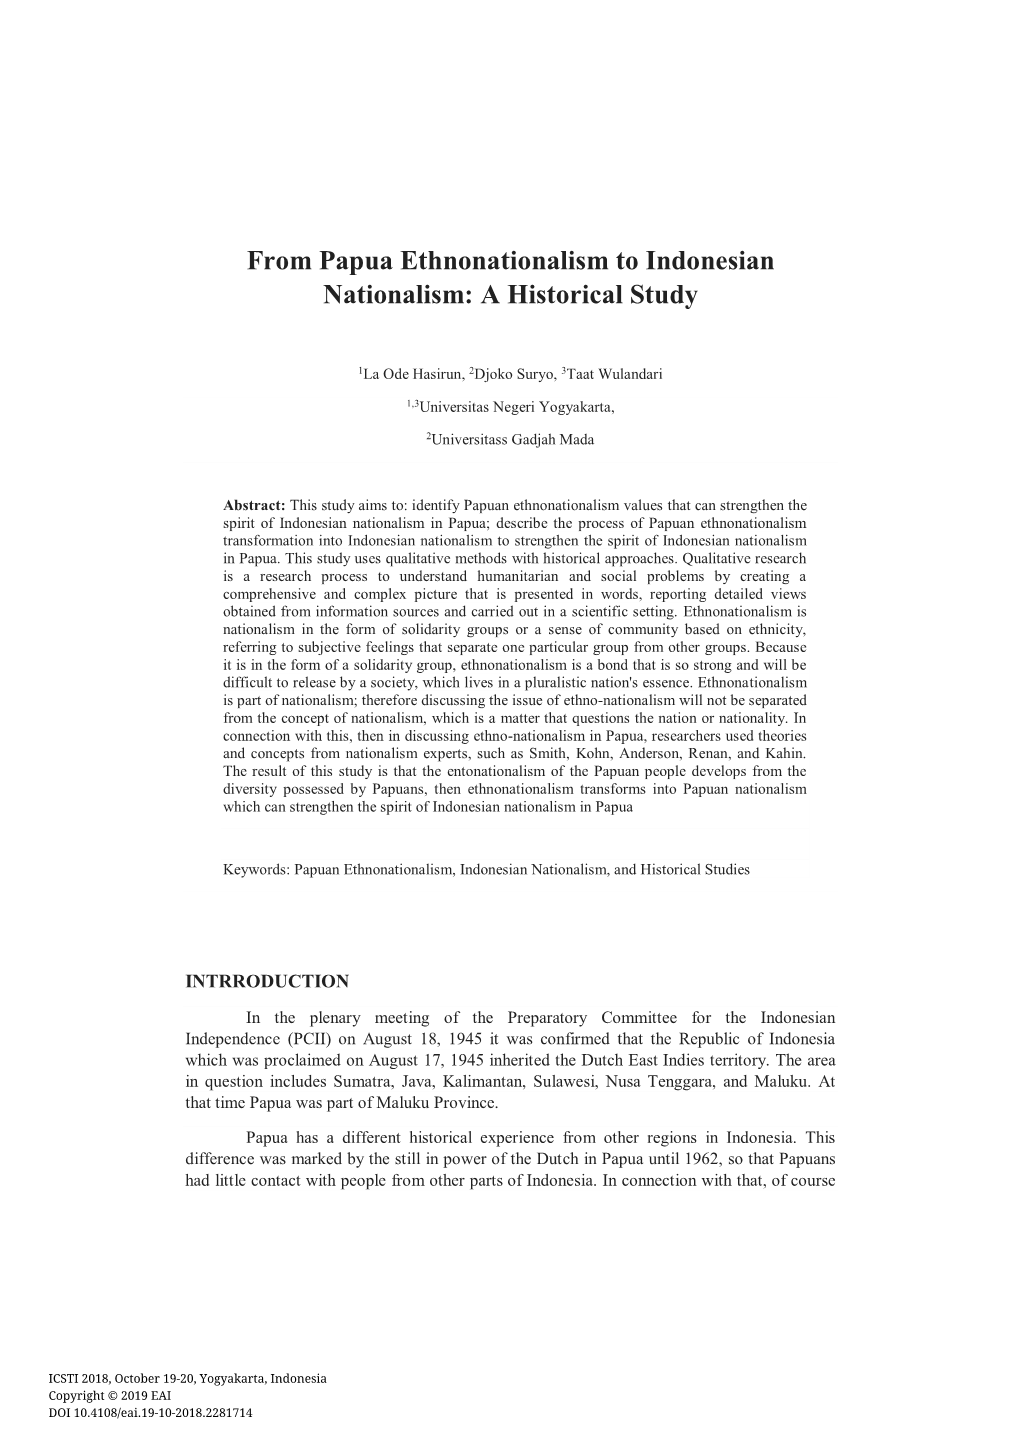 From Papua Ethnonationalism to Indonesian Nationalism: a Historical Study